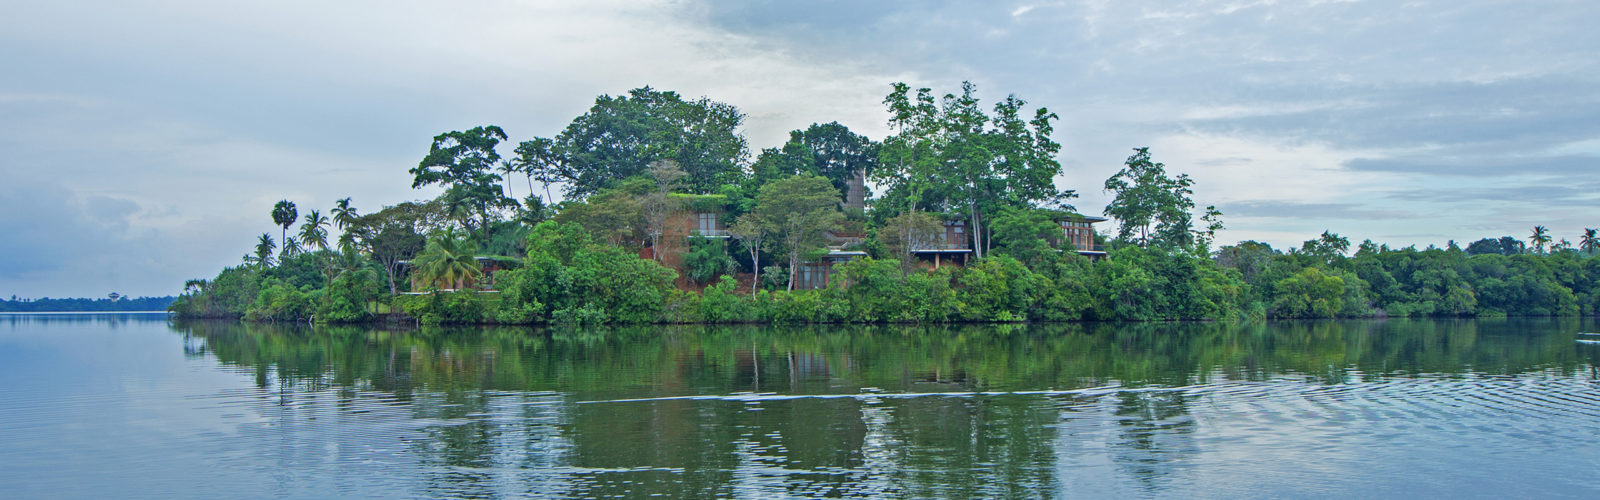 tri-galle-view-from-lake